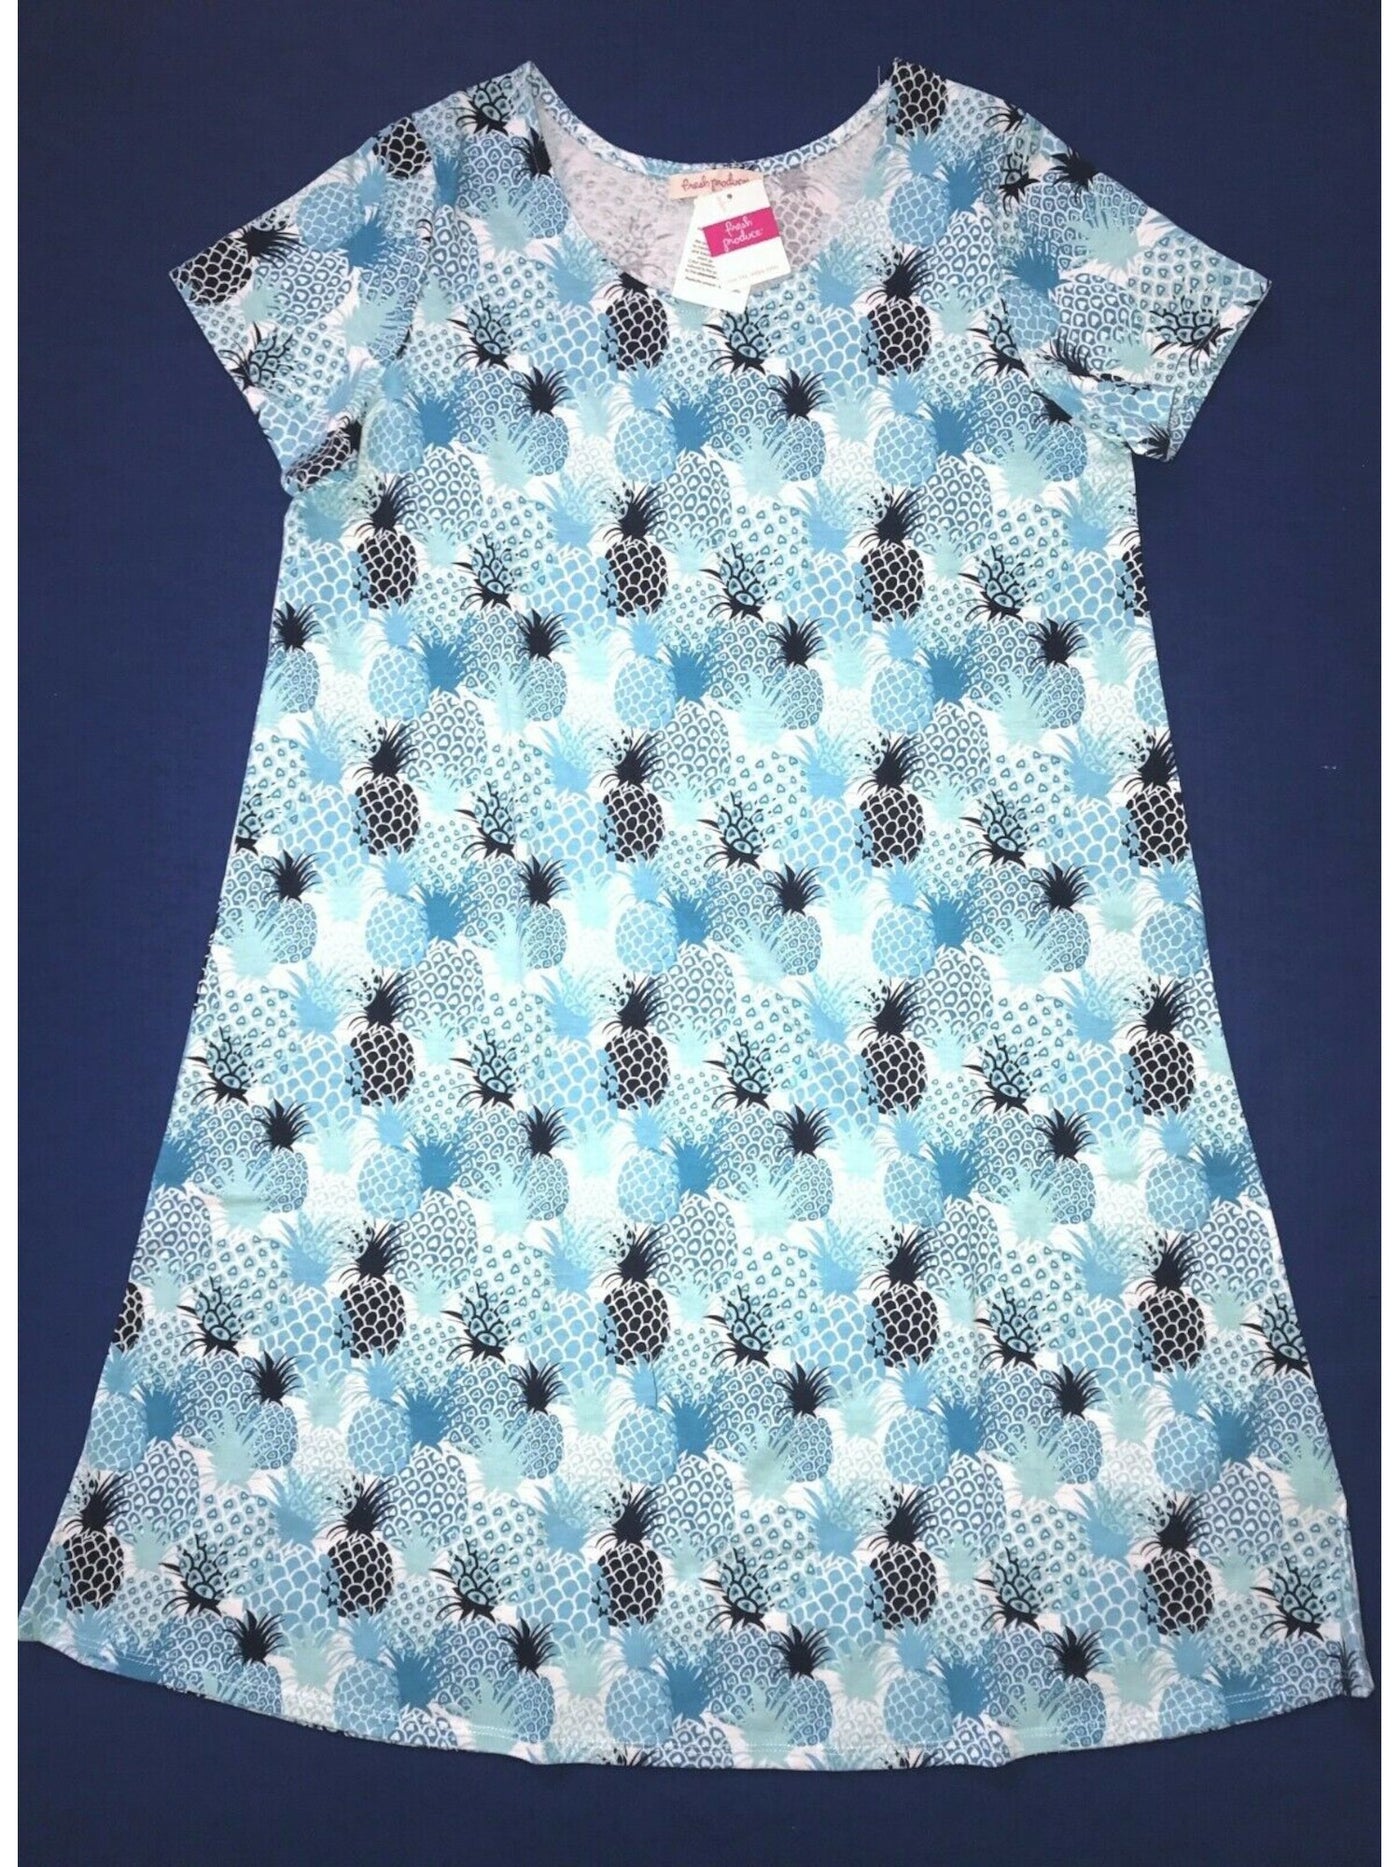 FRESH PRODUCE Womens Blue Printed Short Sleeve Crew Neck Above The Knee Shift Dress XS